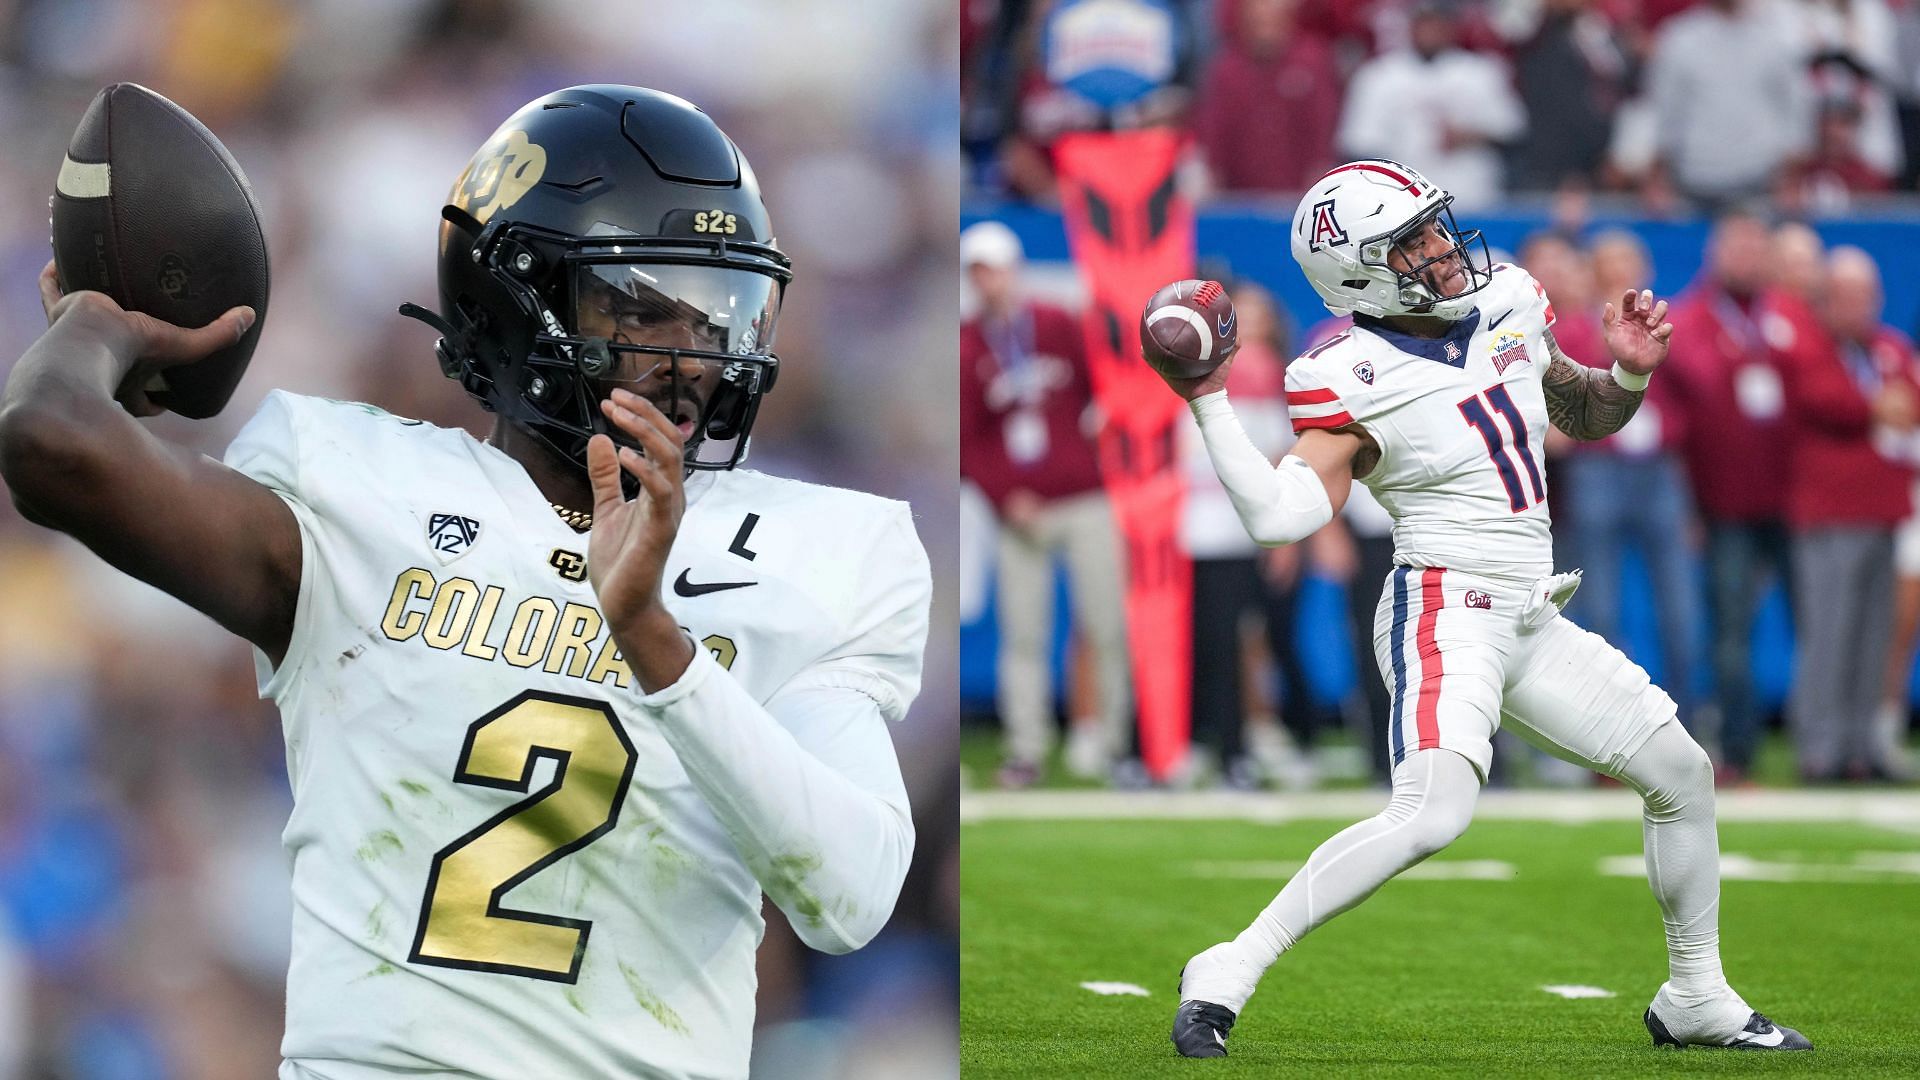 Shedeur Sanders and Noah Fifita are among the top returning quarterbacks in the Big 12